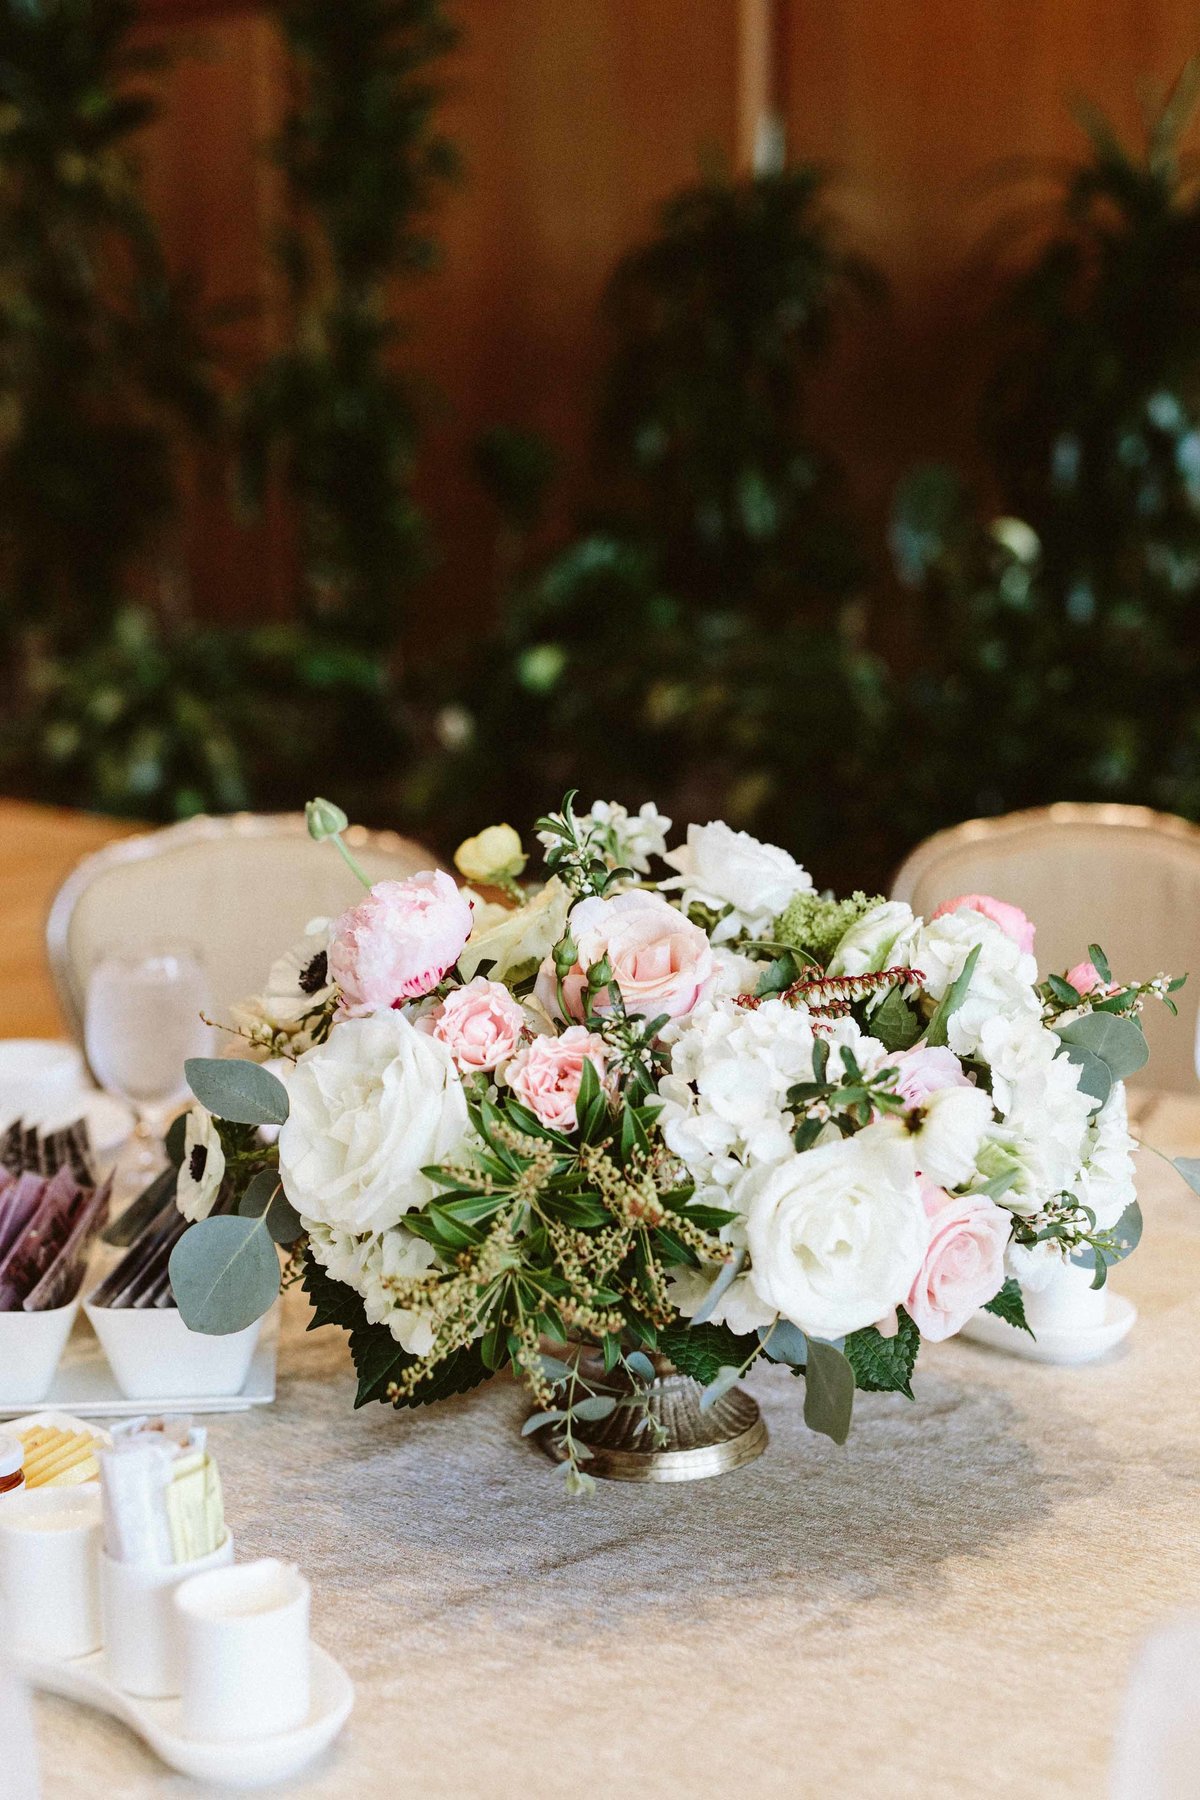 centerpiece for baby girls birthday party of pink roses, white hydrangea, and greenery in silver compote